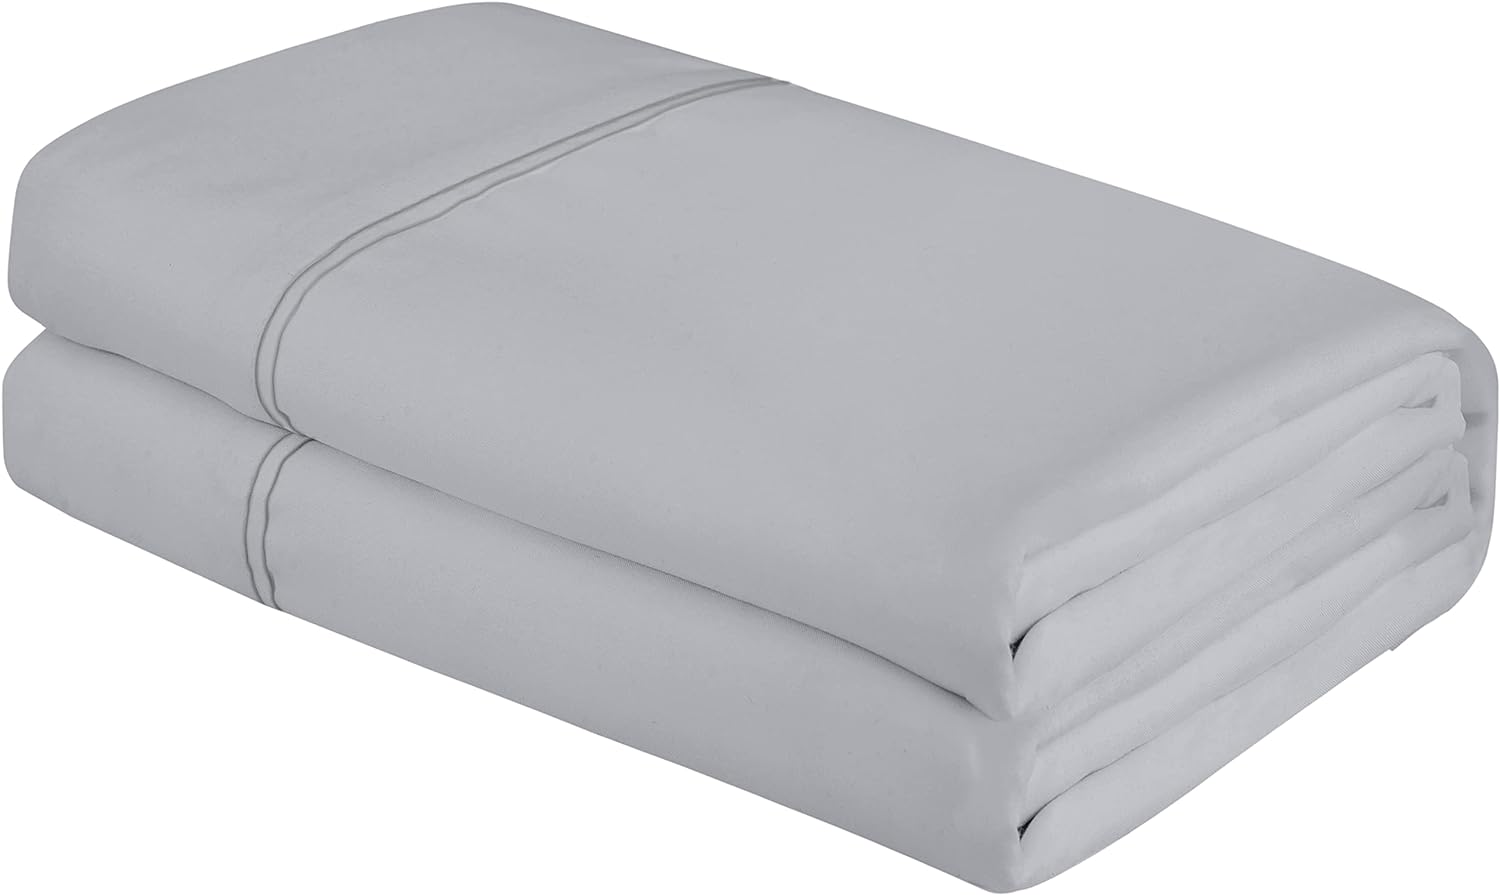 ROYALE LINENS Twin Size Flat Sheet Only - Brushed 1800 Microfiber - Ultra Soft & Breathable - Wrinkle & Stain Resistant - Hotel Quality Flat Sheet Sold Separately - Top Sheet for Bed - (Twin, Silver)